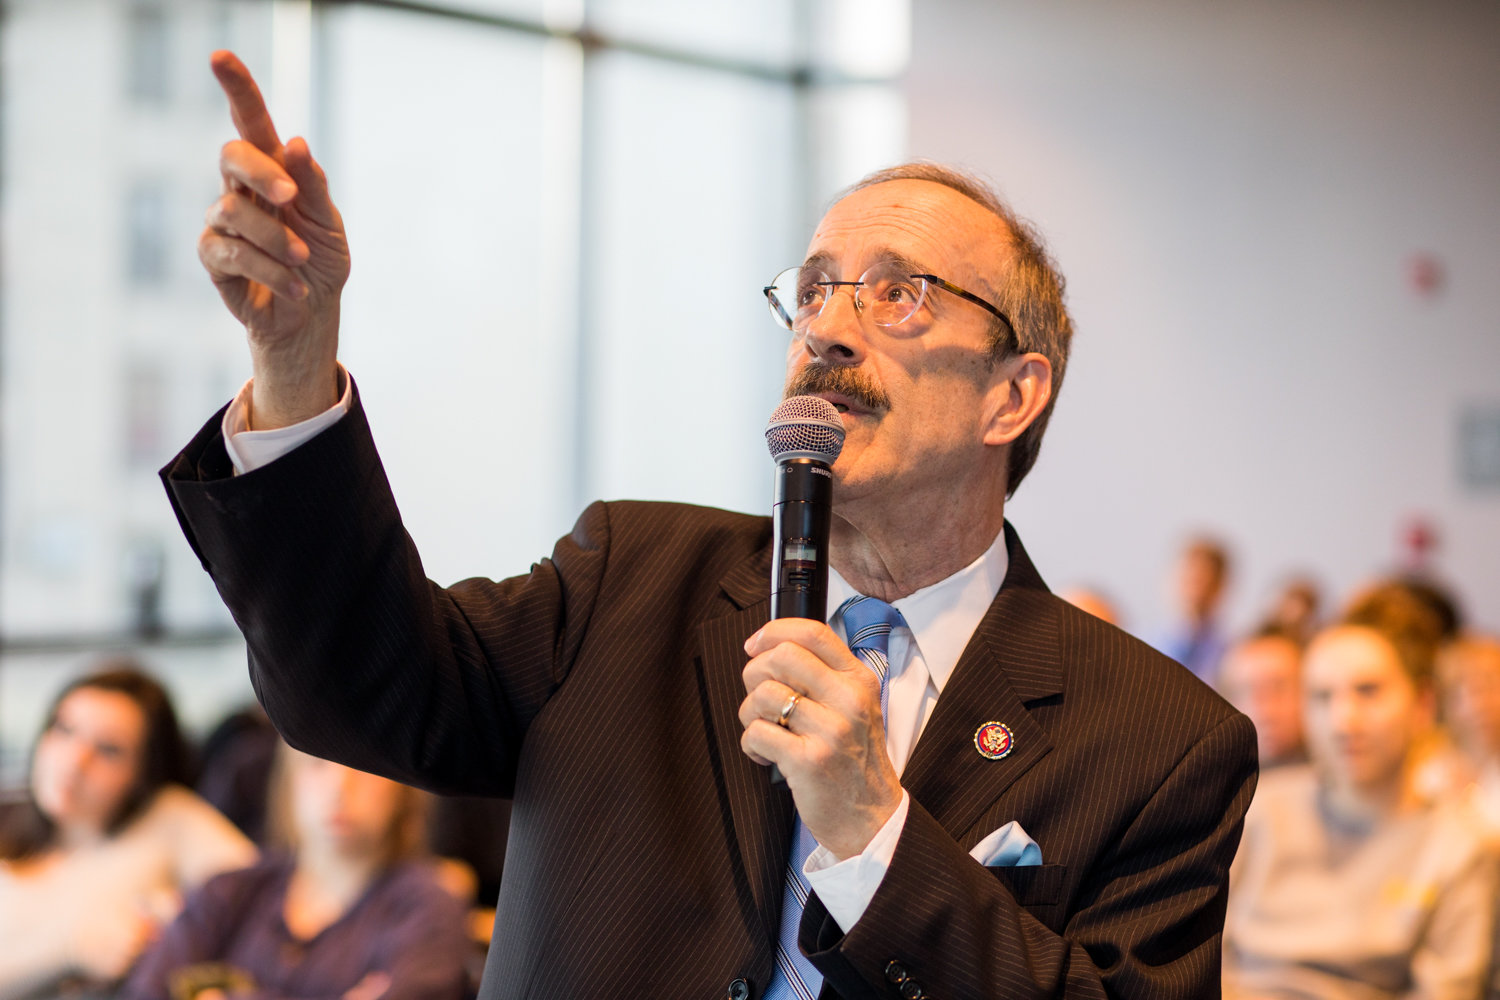 U.S. Rep. Eliot Engel may soon find himself tested before a virtual audience after Jamaal Bowman called for a one-on-one debate.